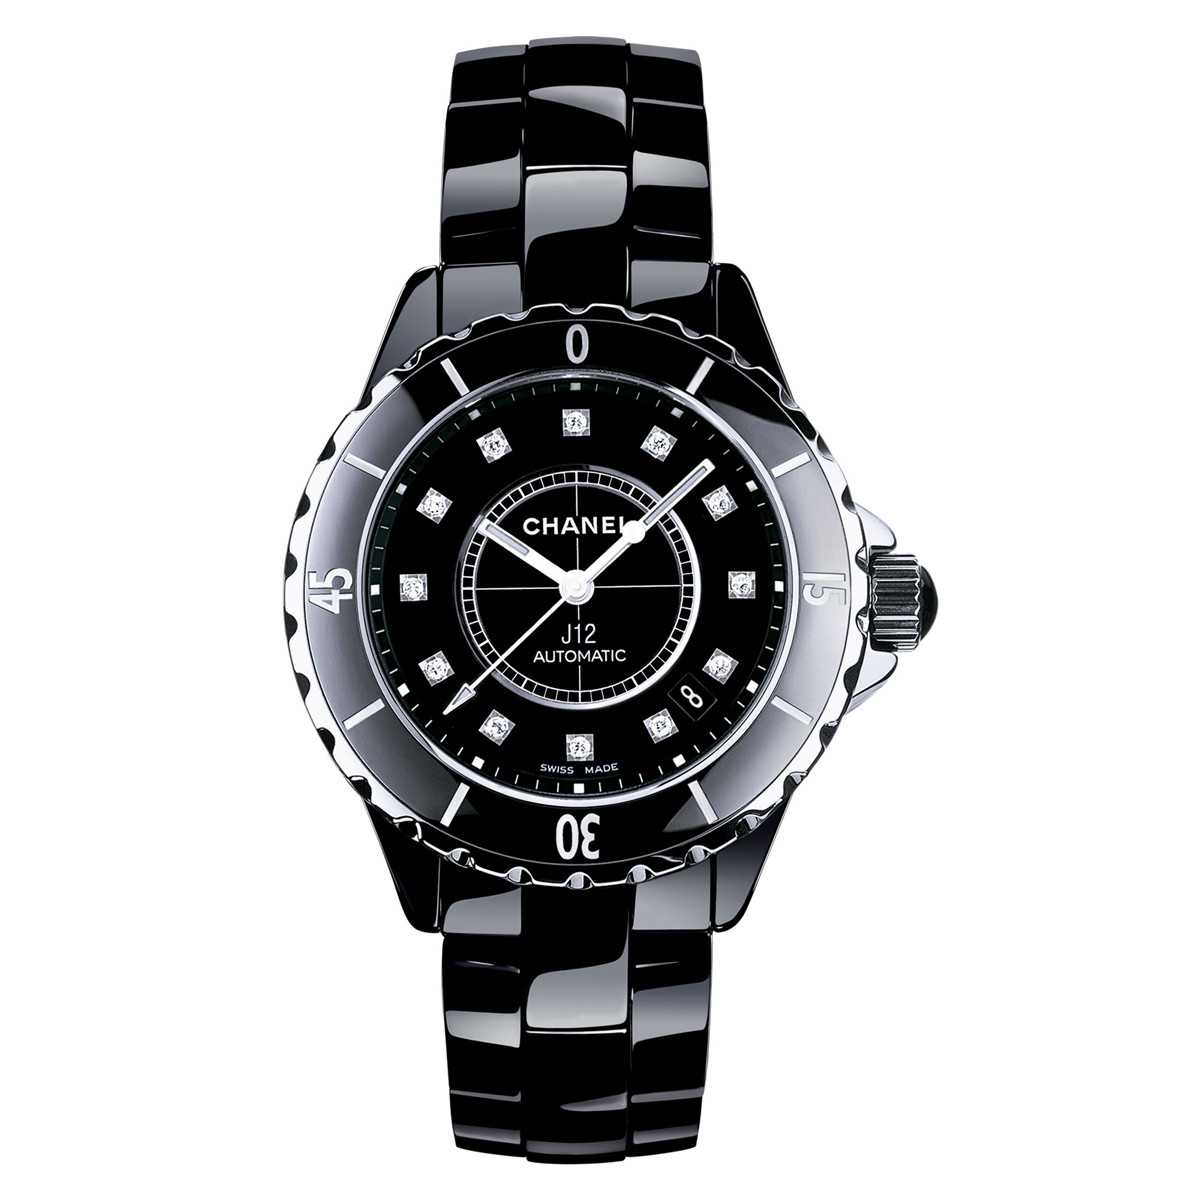 Chanel J12 Black Ceramic 35mm Watch for $2,702 for sale from a